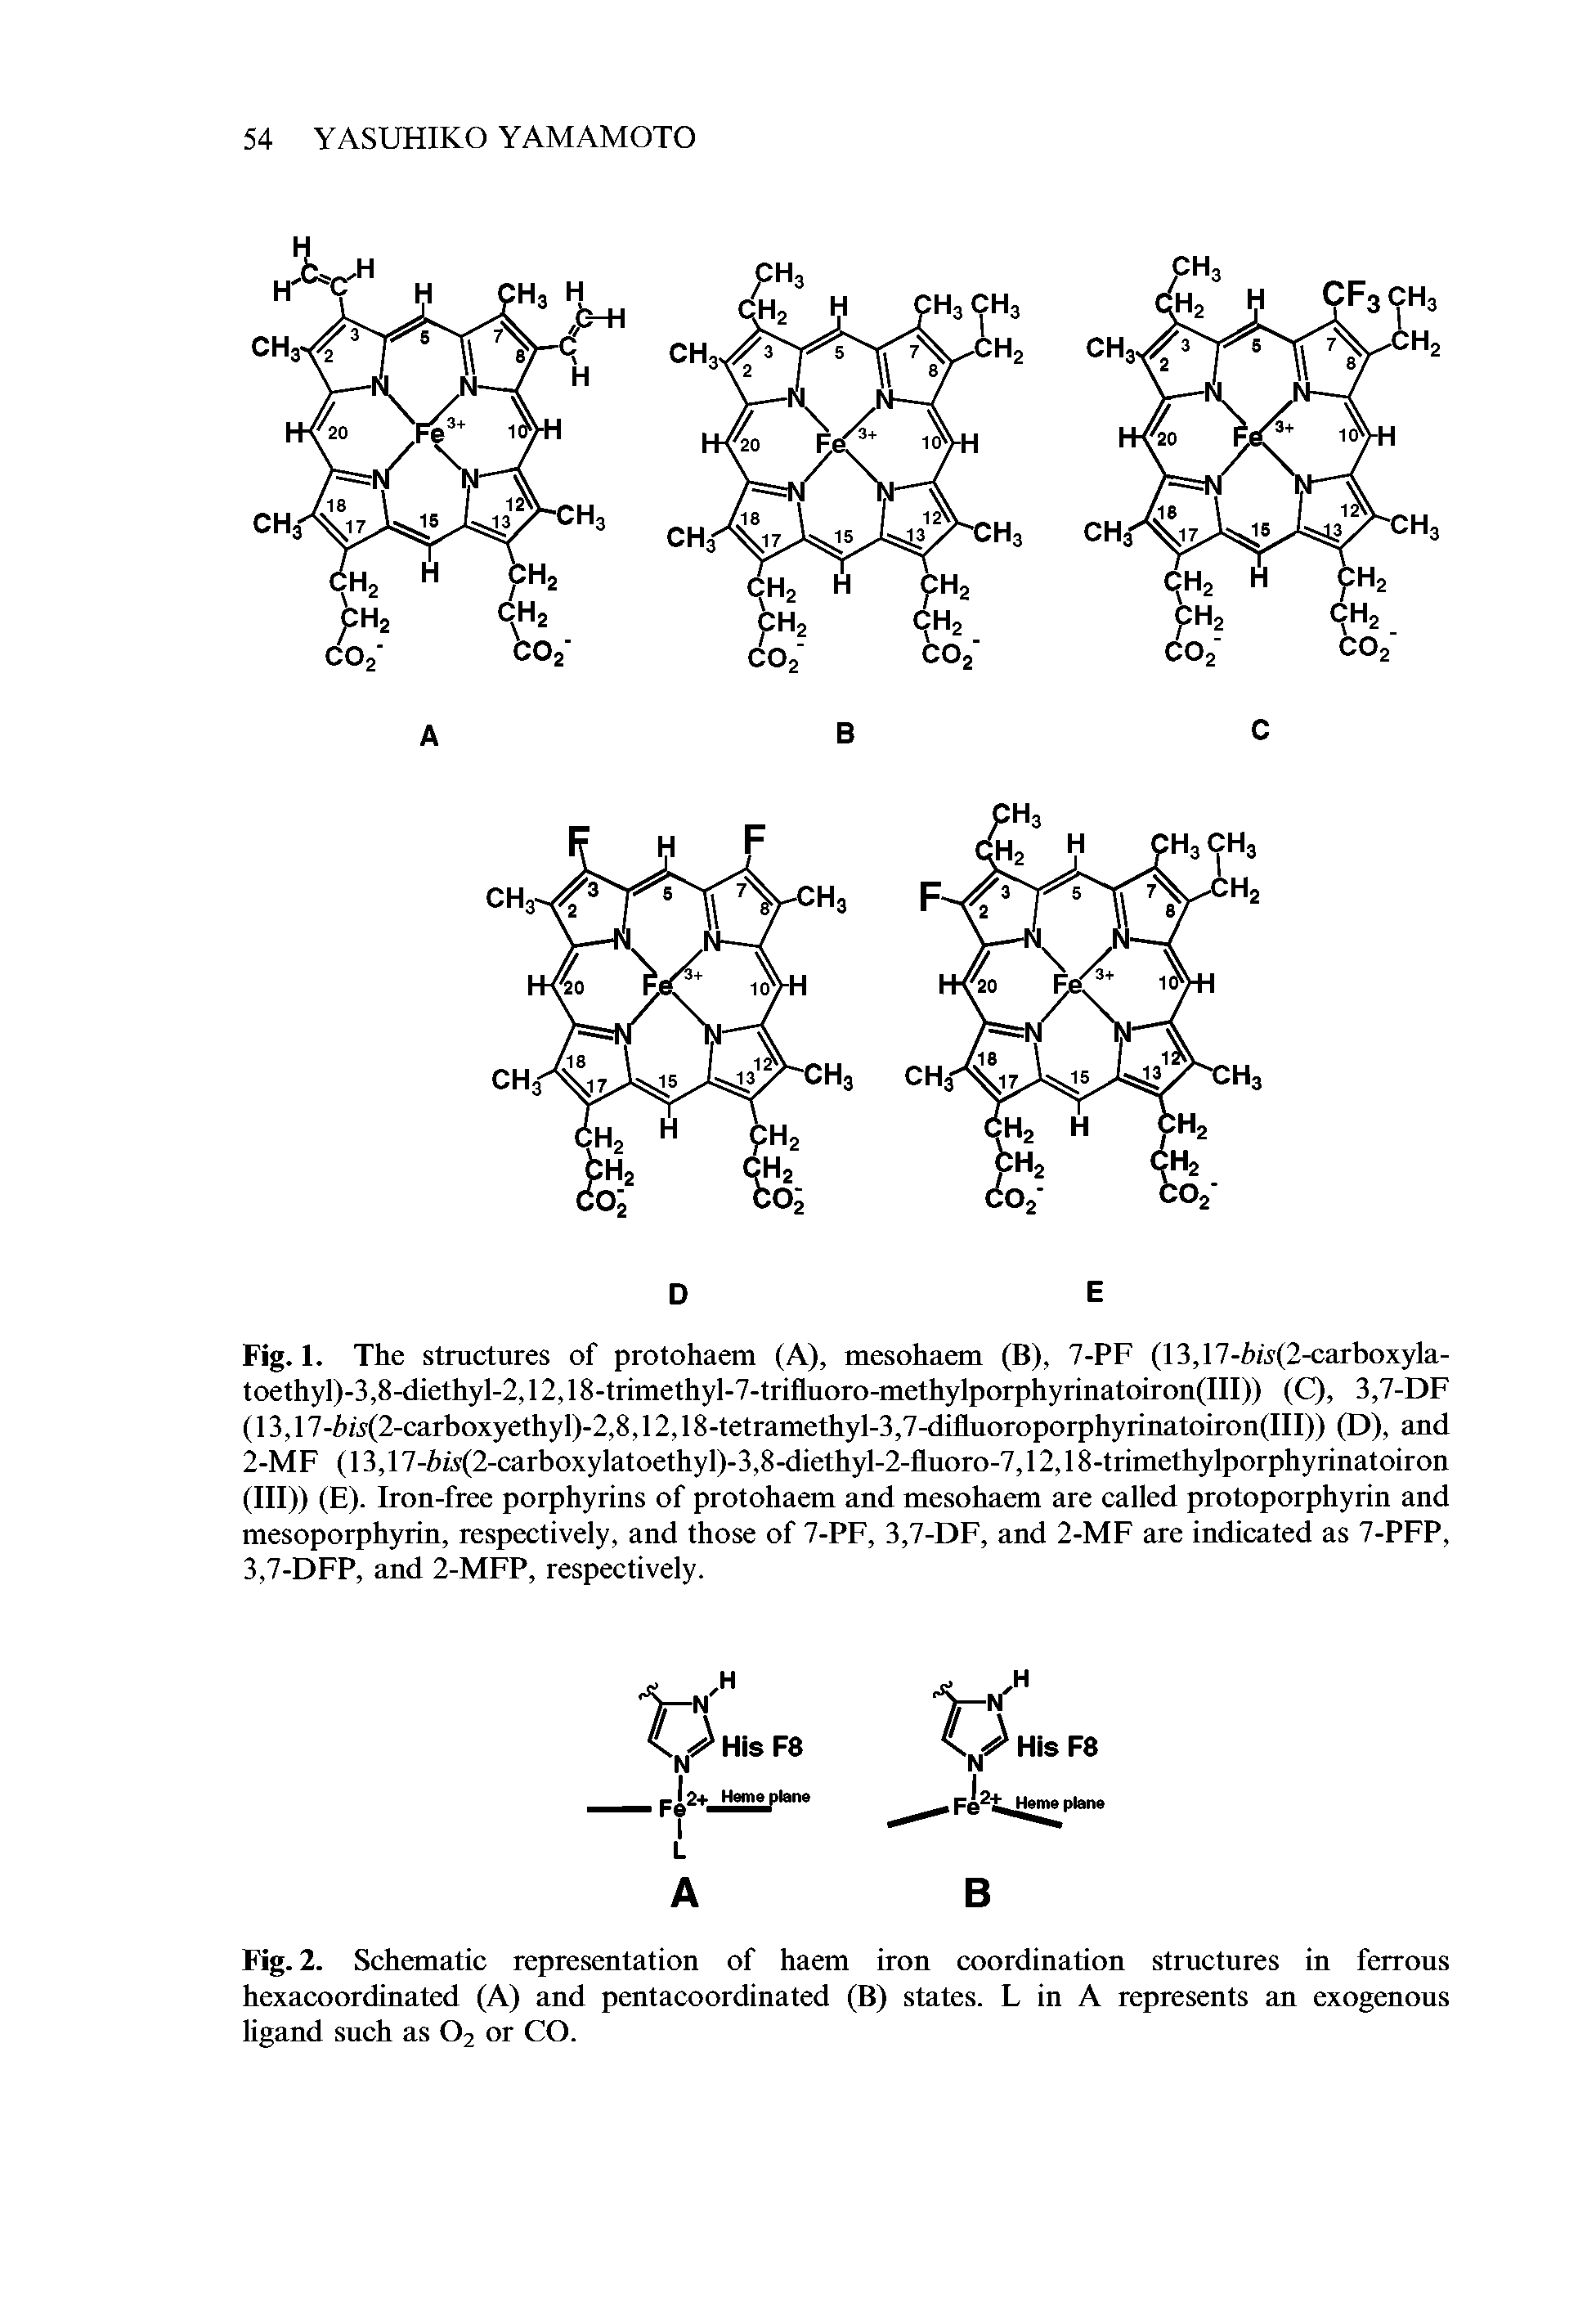 Fig. 1. The structures of protohaem (A), mesohaem (B), 7-PF (13,17-hw(2-carboxyla-toethyl)-3,8-diethyl-2,12,18-trimethyl-7-trifluoro-methylporphyrinatoiron(III)) (Q, 3,7-DF (13,17-hw(2-carboxyethyl)-2,8,12,18-tetramethyl-3,7-difluoroporphyrinatoiron(III)) (D), and 2-MF (13,17-hA(2-carboxylatoethyl)-3,8-diethyl-2-fluoro-7,12,18-trimethylporphyrinatoiron (III)) (E). Iron-free porphyrins of protohaem and mesohaem are called protoporphyrin and mesoporphyrin, respectively, and those of 7-PF, 3,7-DF, and 2-MF are indicated as 7-PFP, 3,7-DFP, and 2-MFP, respectively.